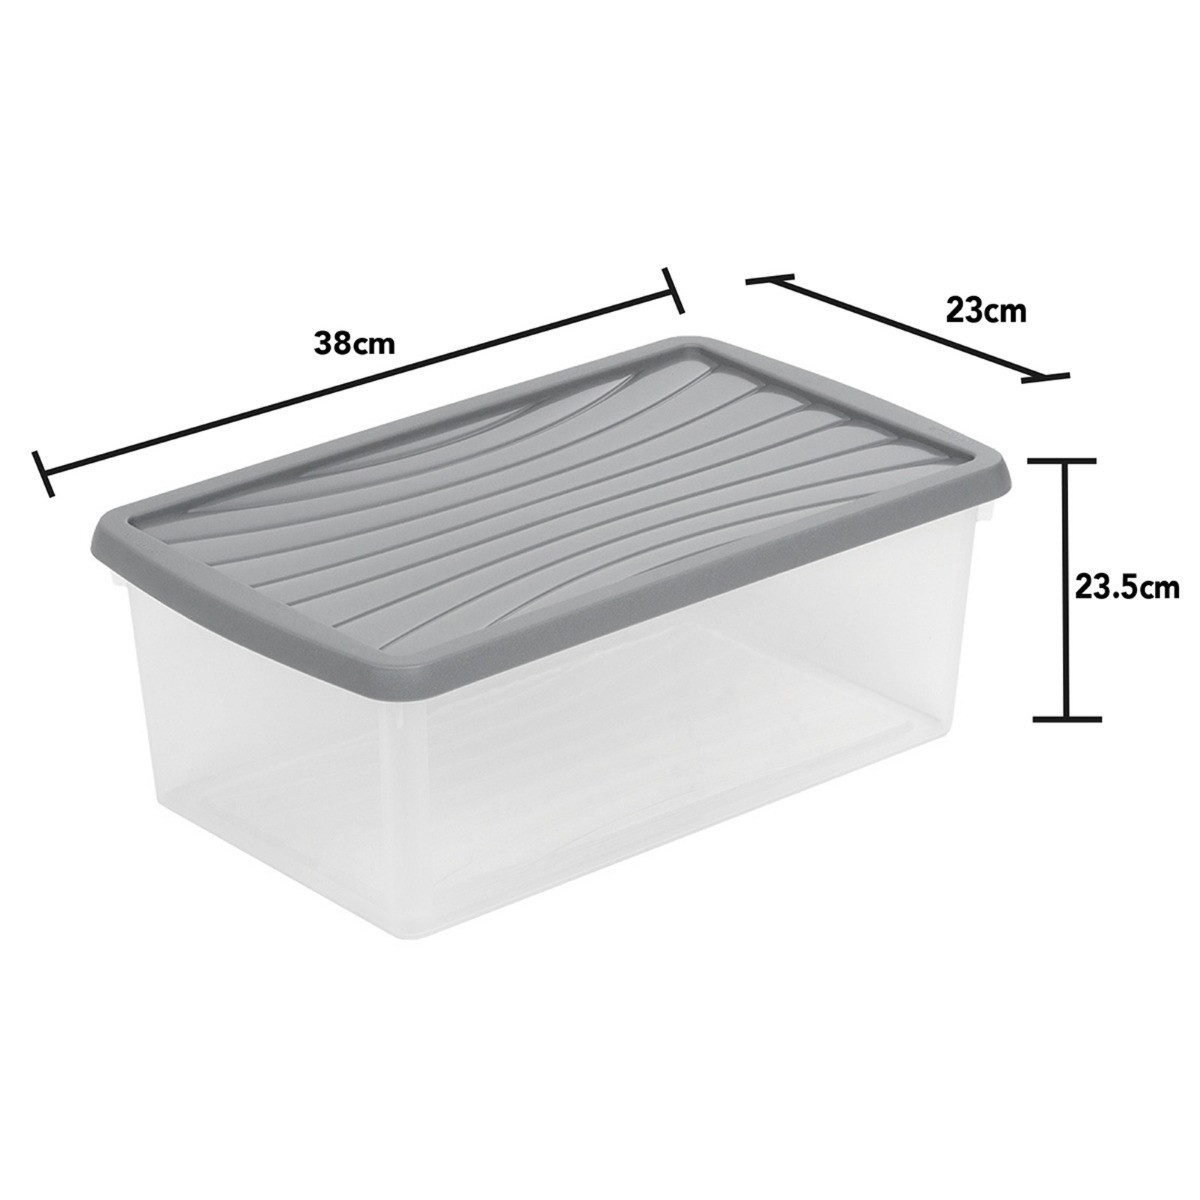 Wham 9L Set of 3 Stackable Boxes & Lid - Clear/Navy>